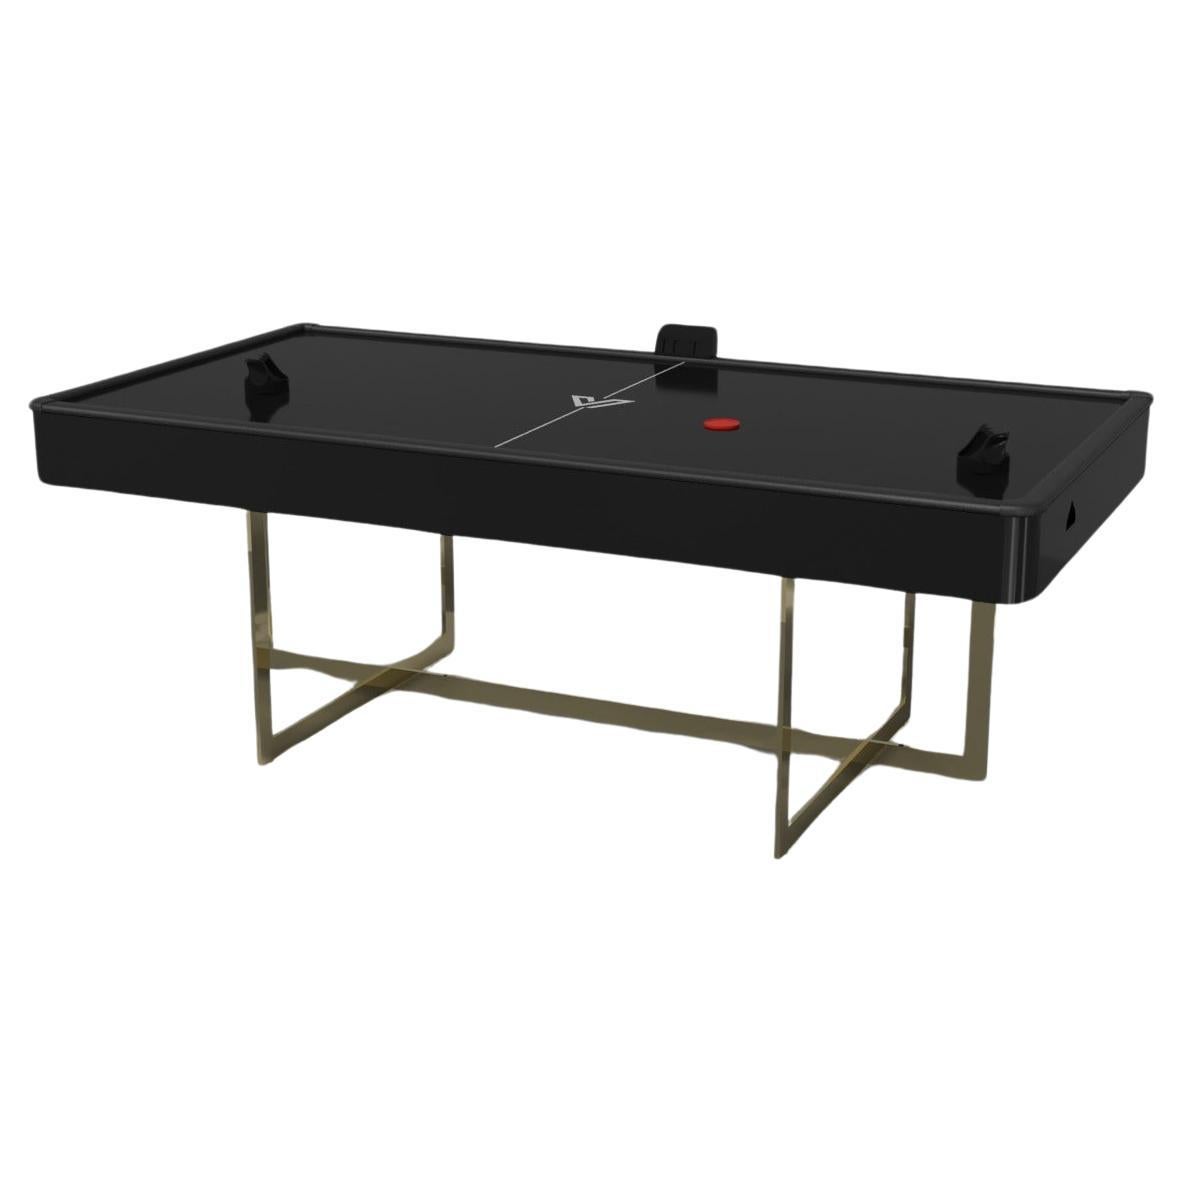 Elevate Customs Beso Air Hockey Tables / Brass Stainless Steel Metal in 7' - USA For Sale